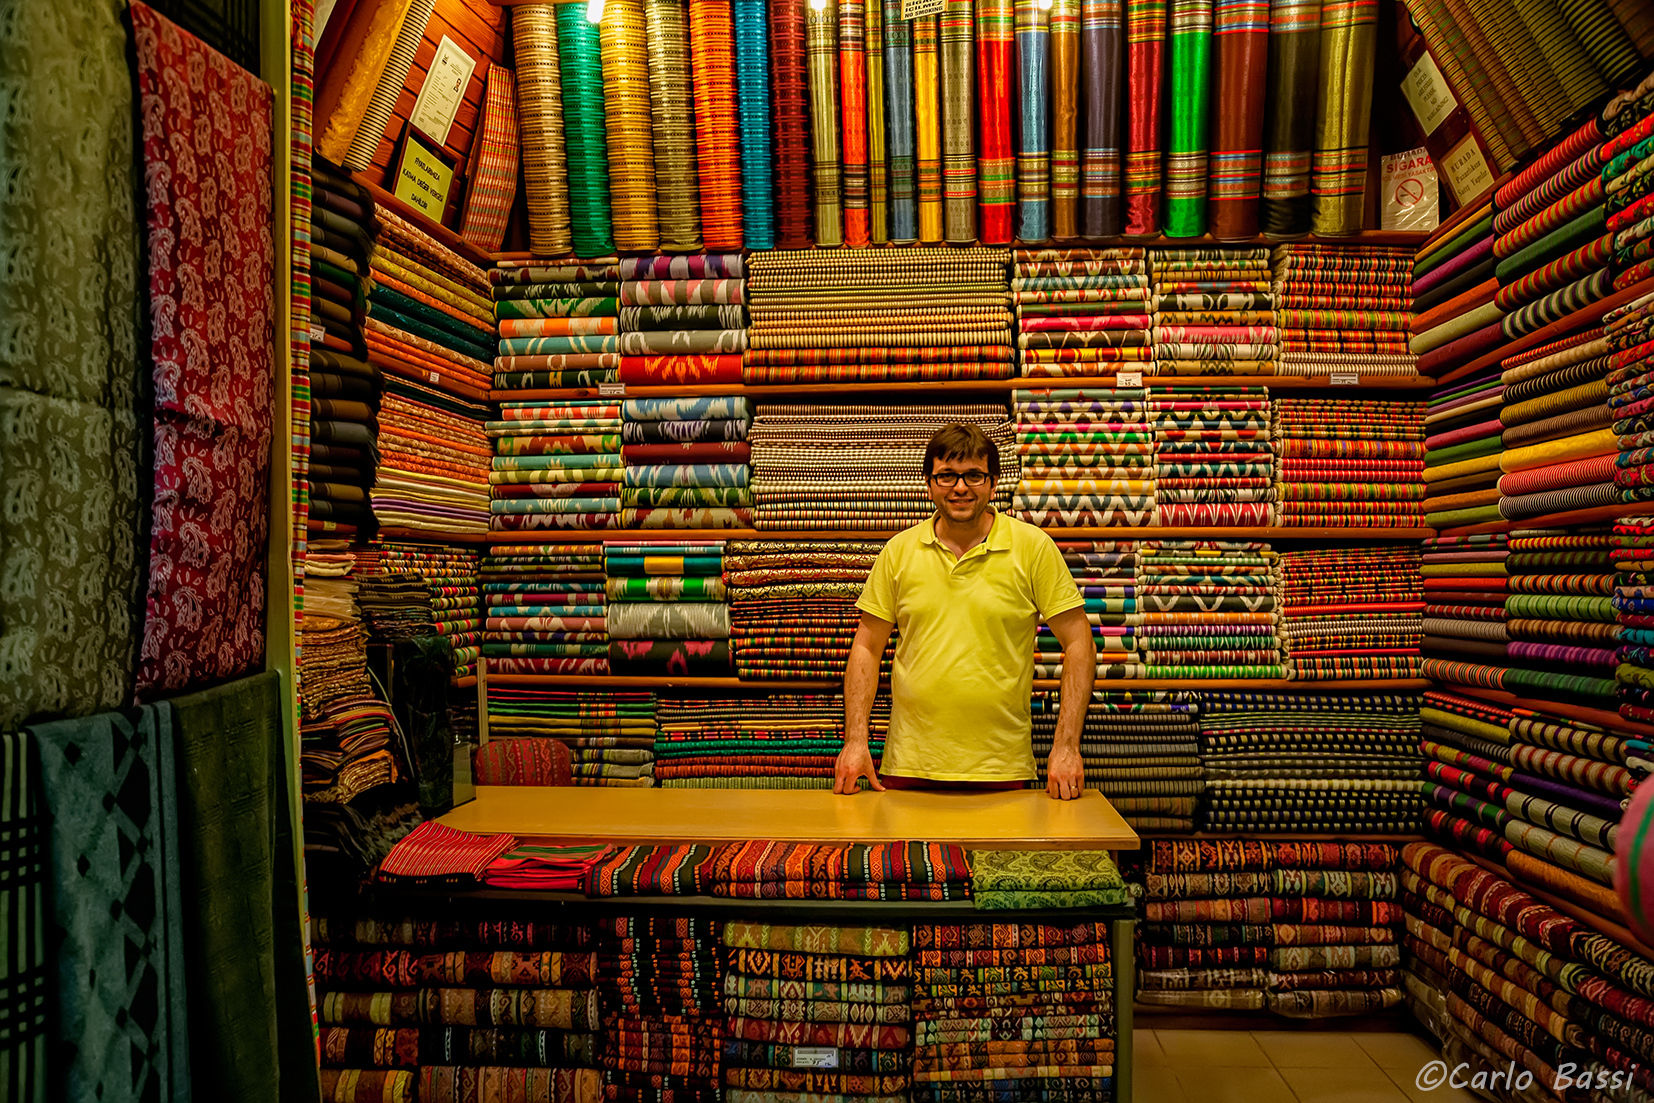 Istanbul, the (very odinated) cloth merchant...